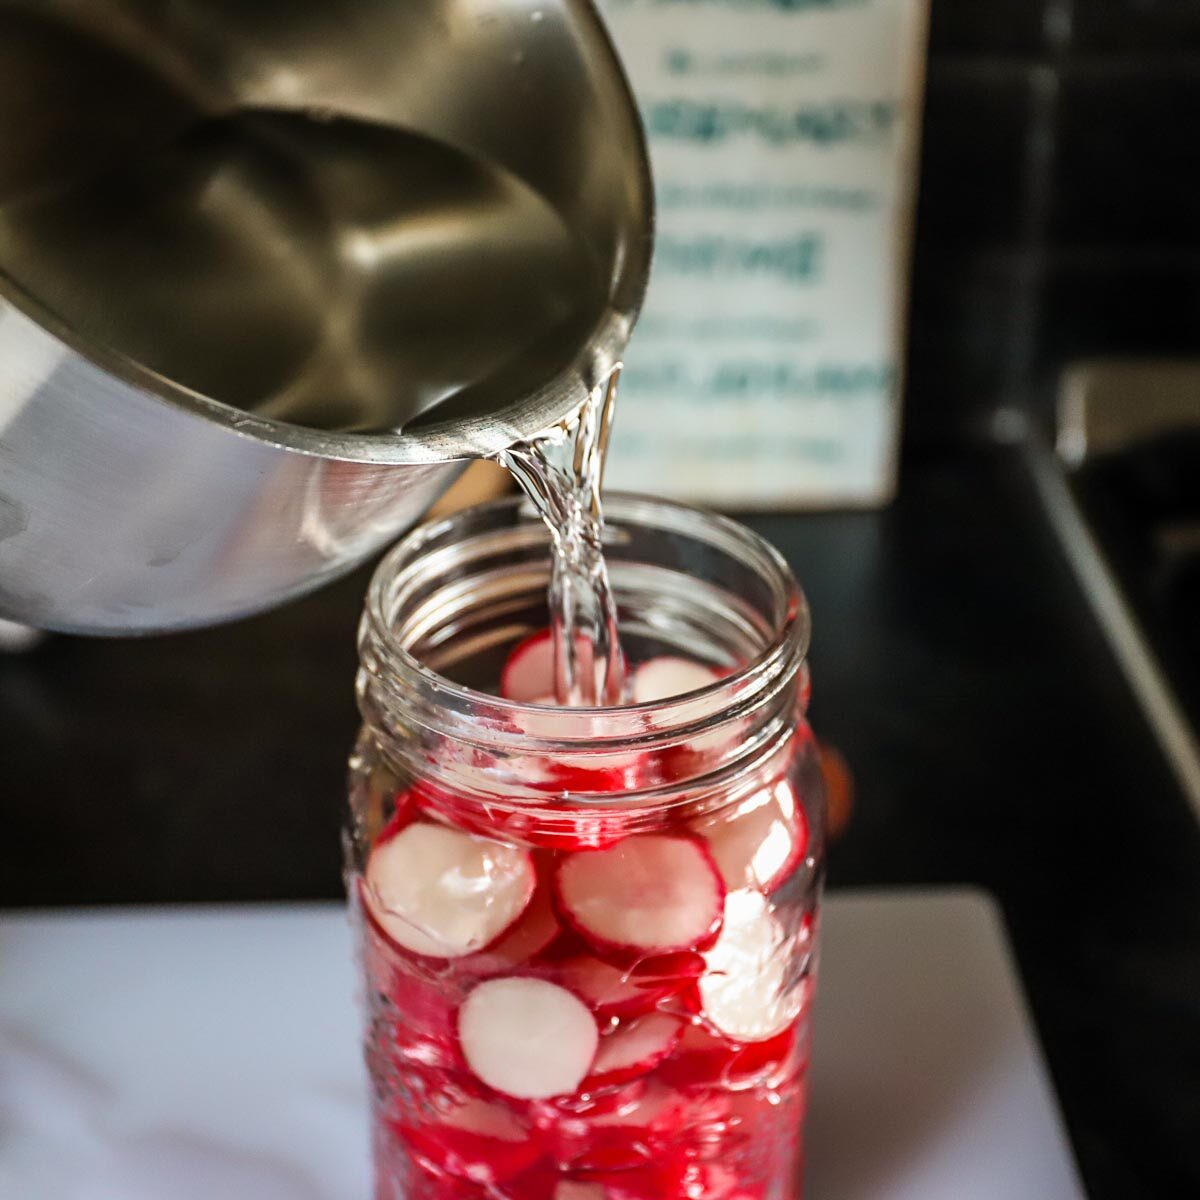 The clear salt water brine is being poured over the radishes in the mason jar.